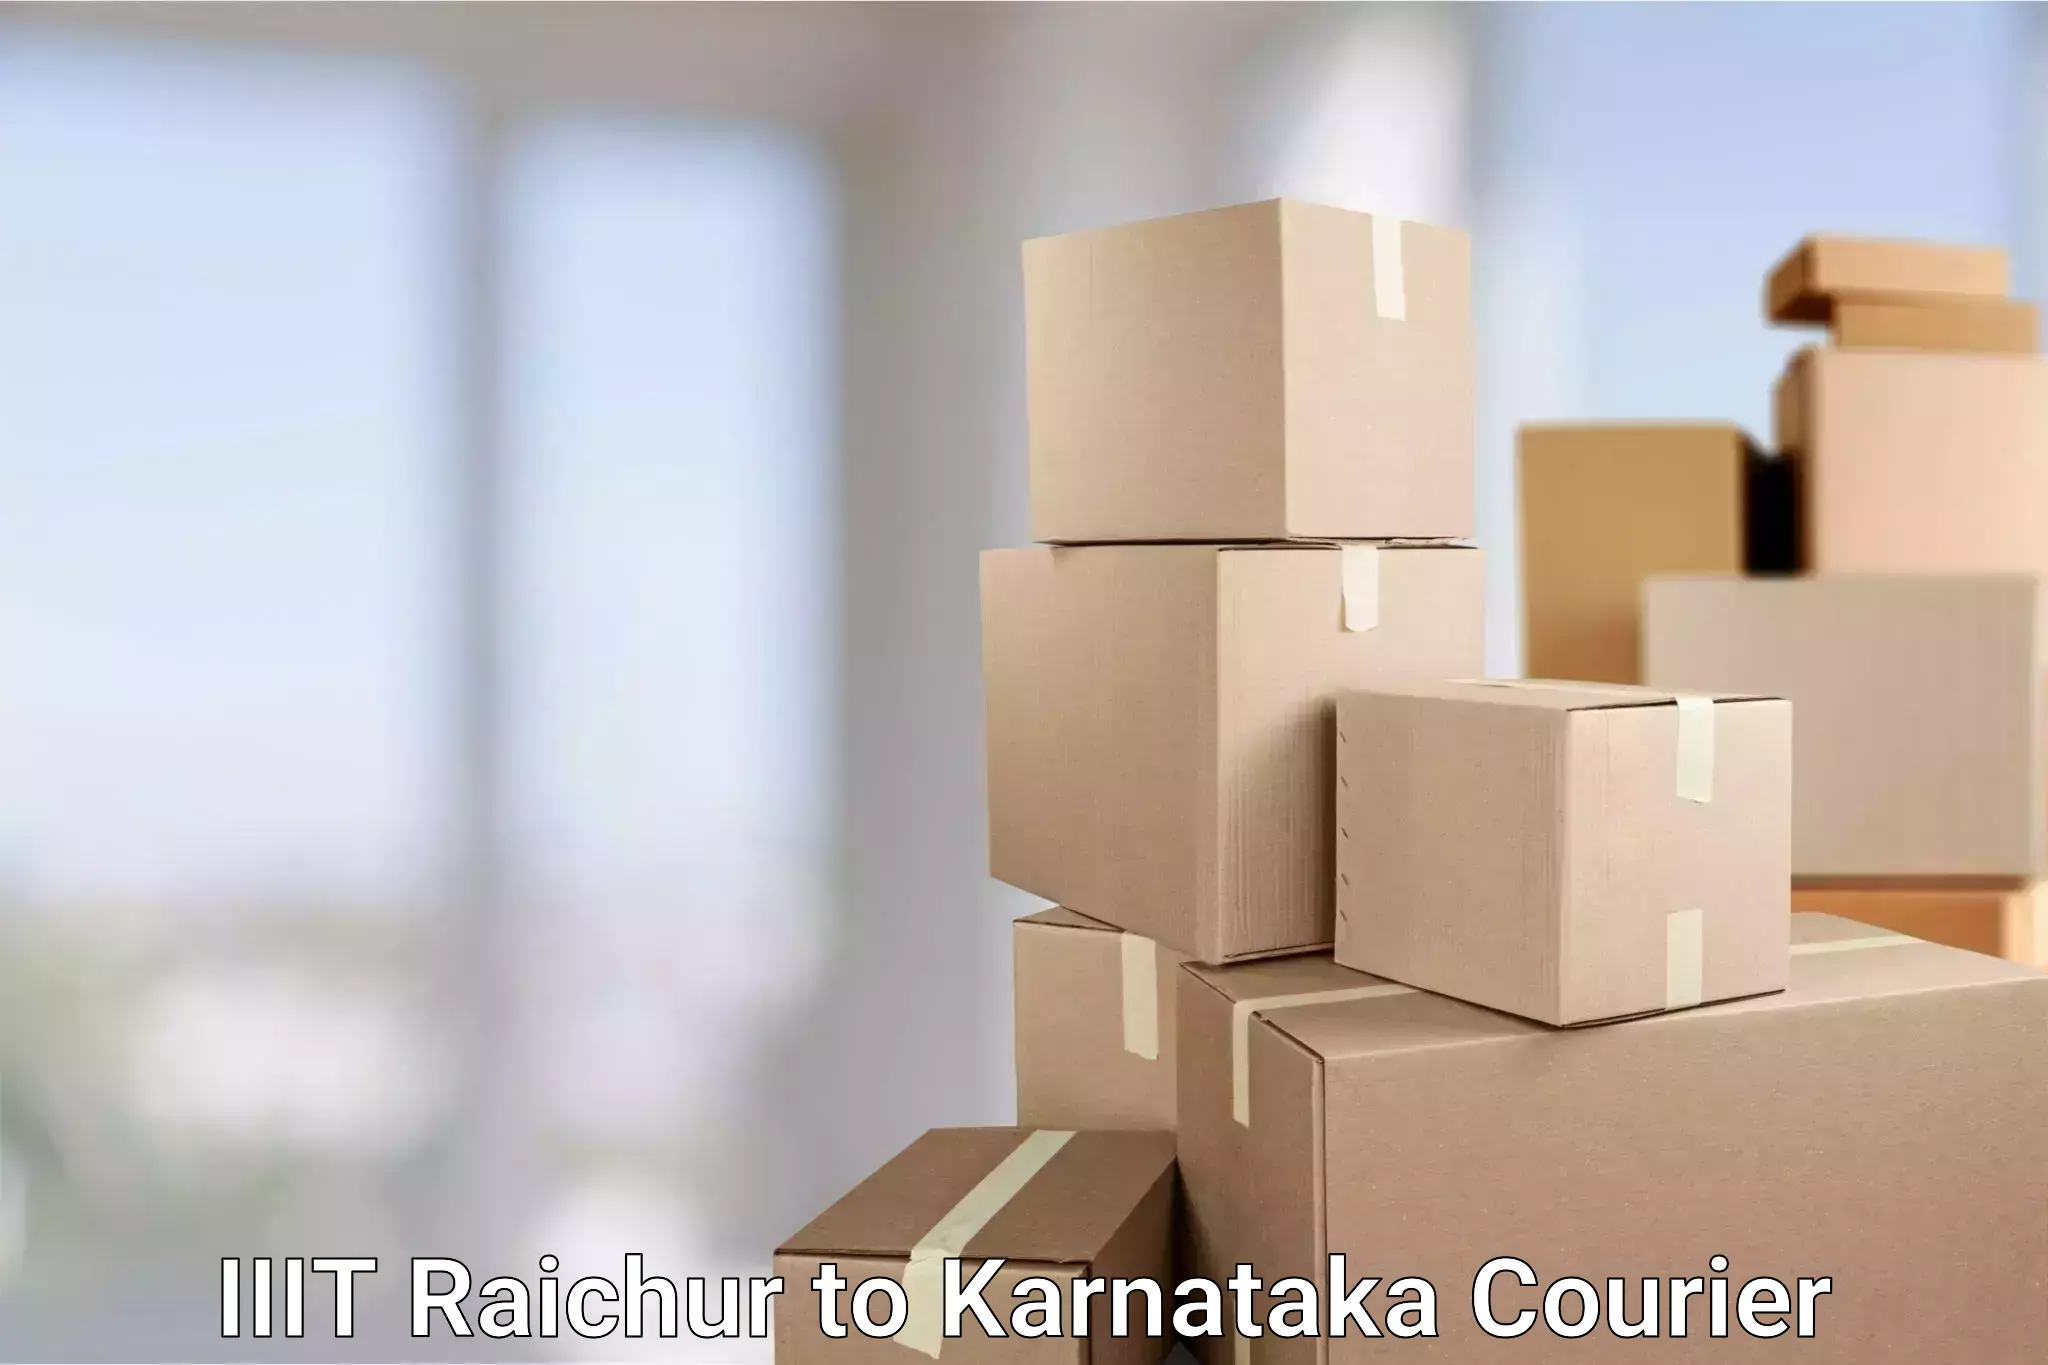 High-quality delivery services IIIT Raichur to Mangalore